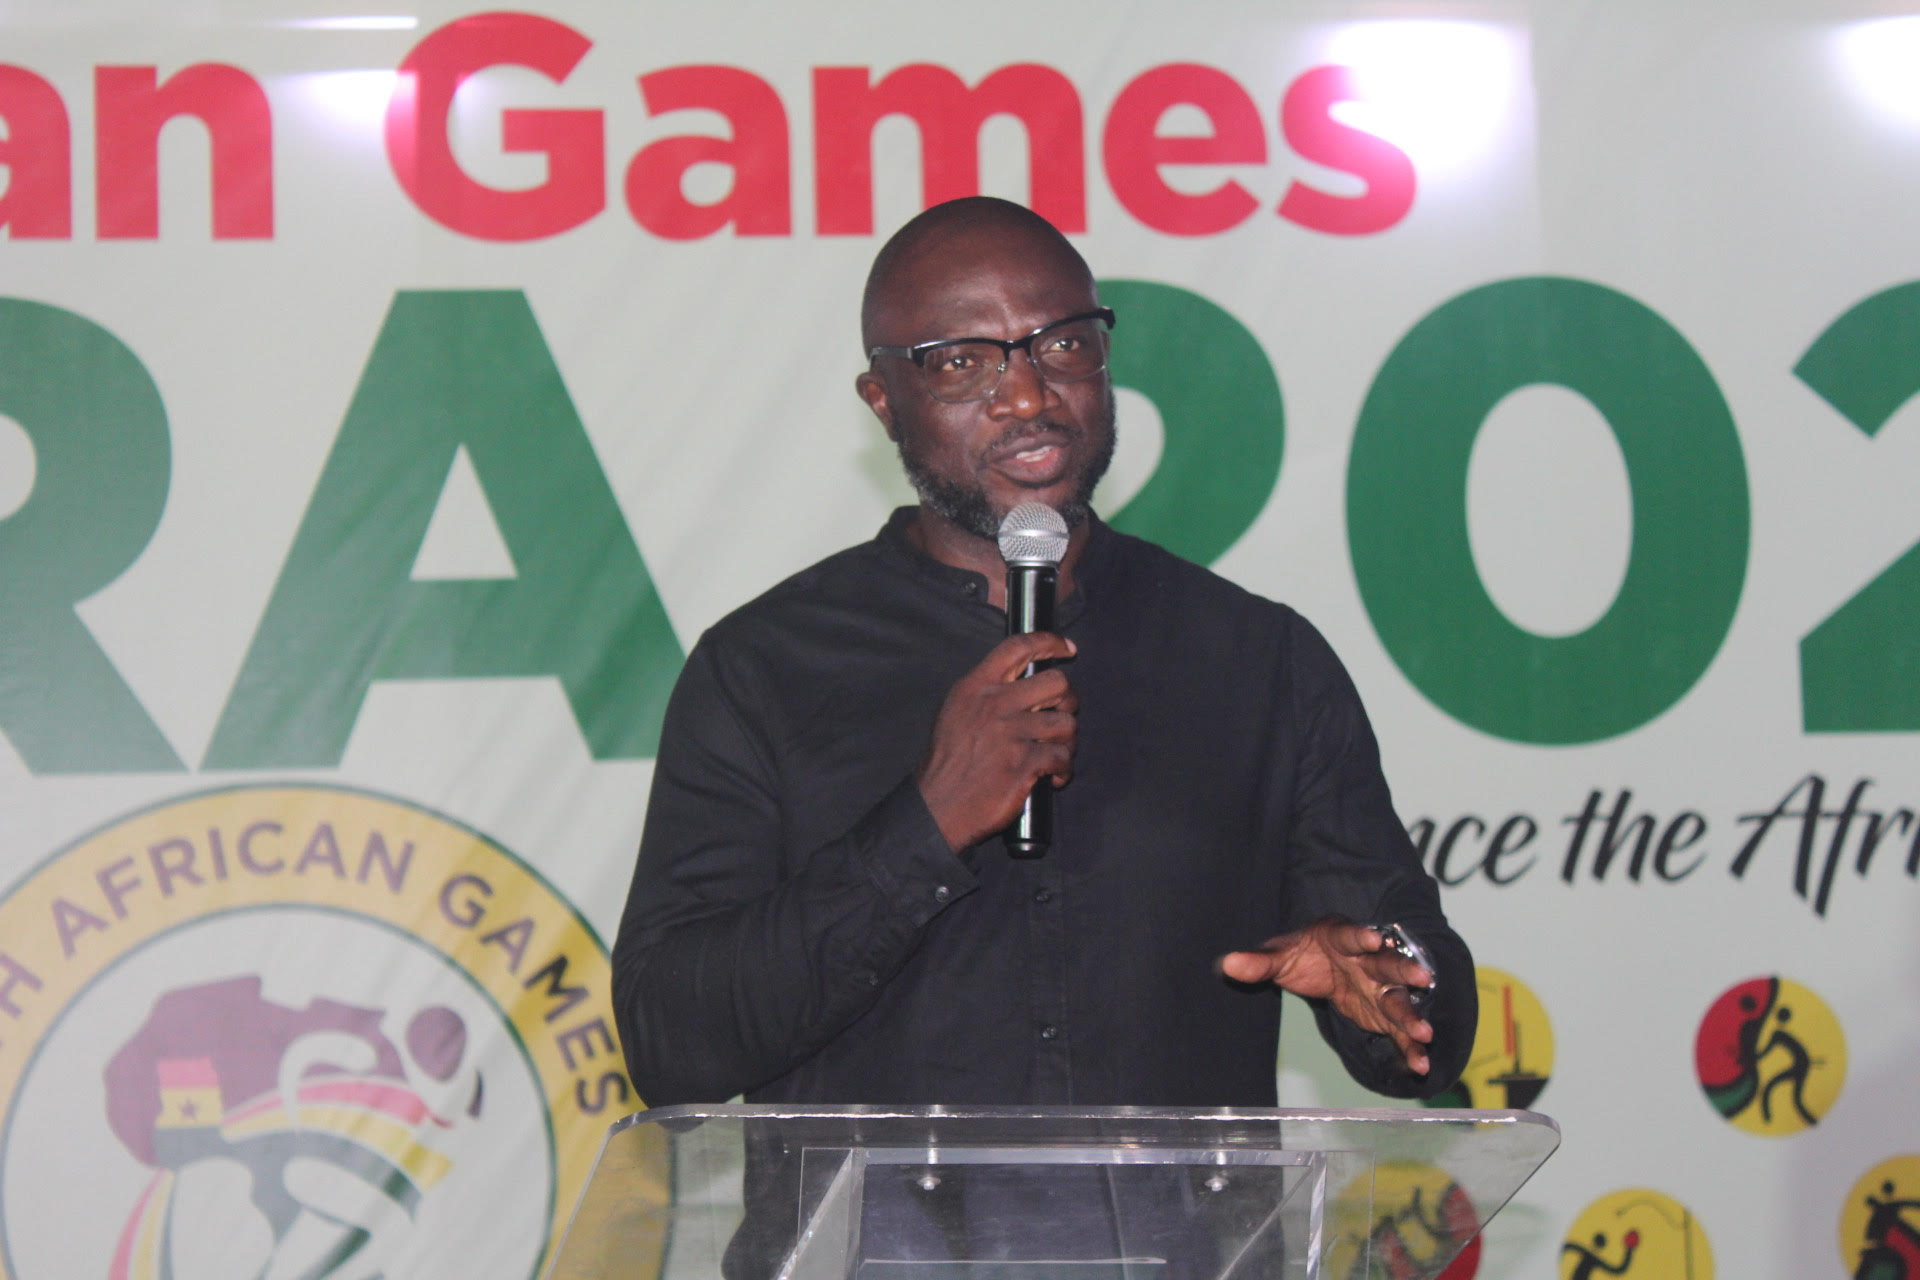 Ghana to present 560 contingent size for 13th African Games